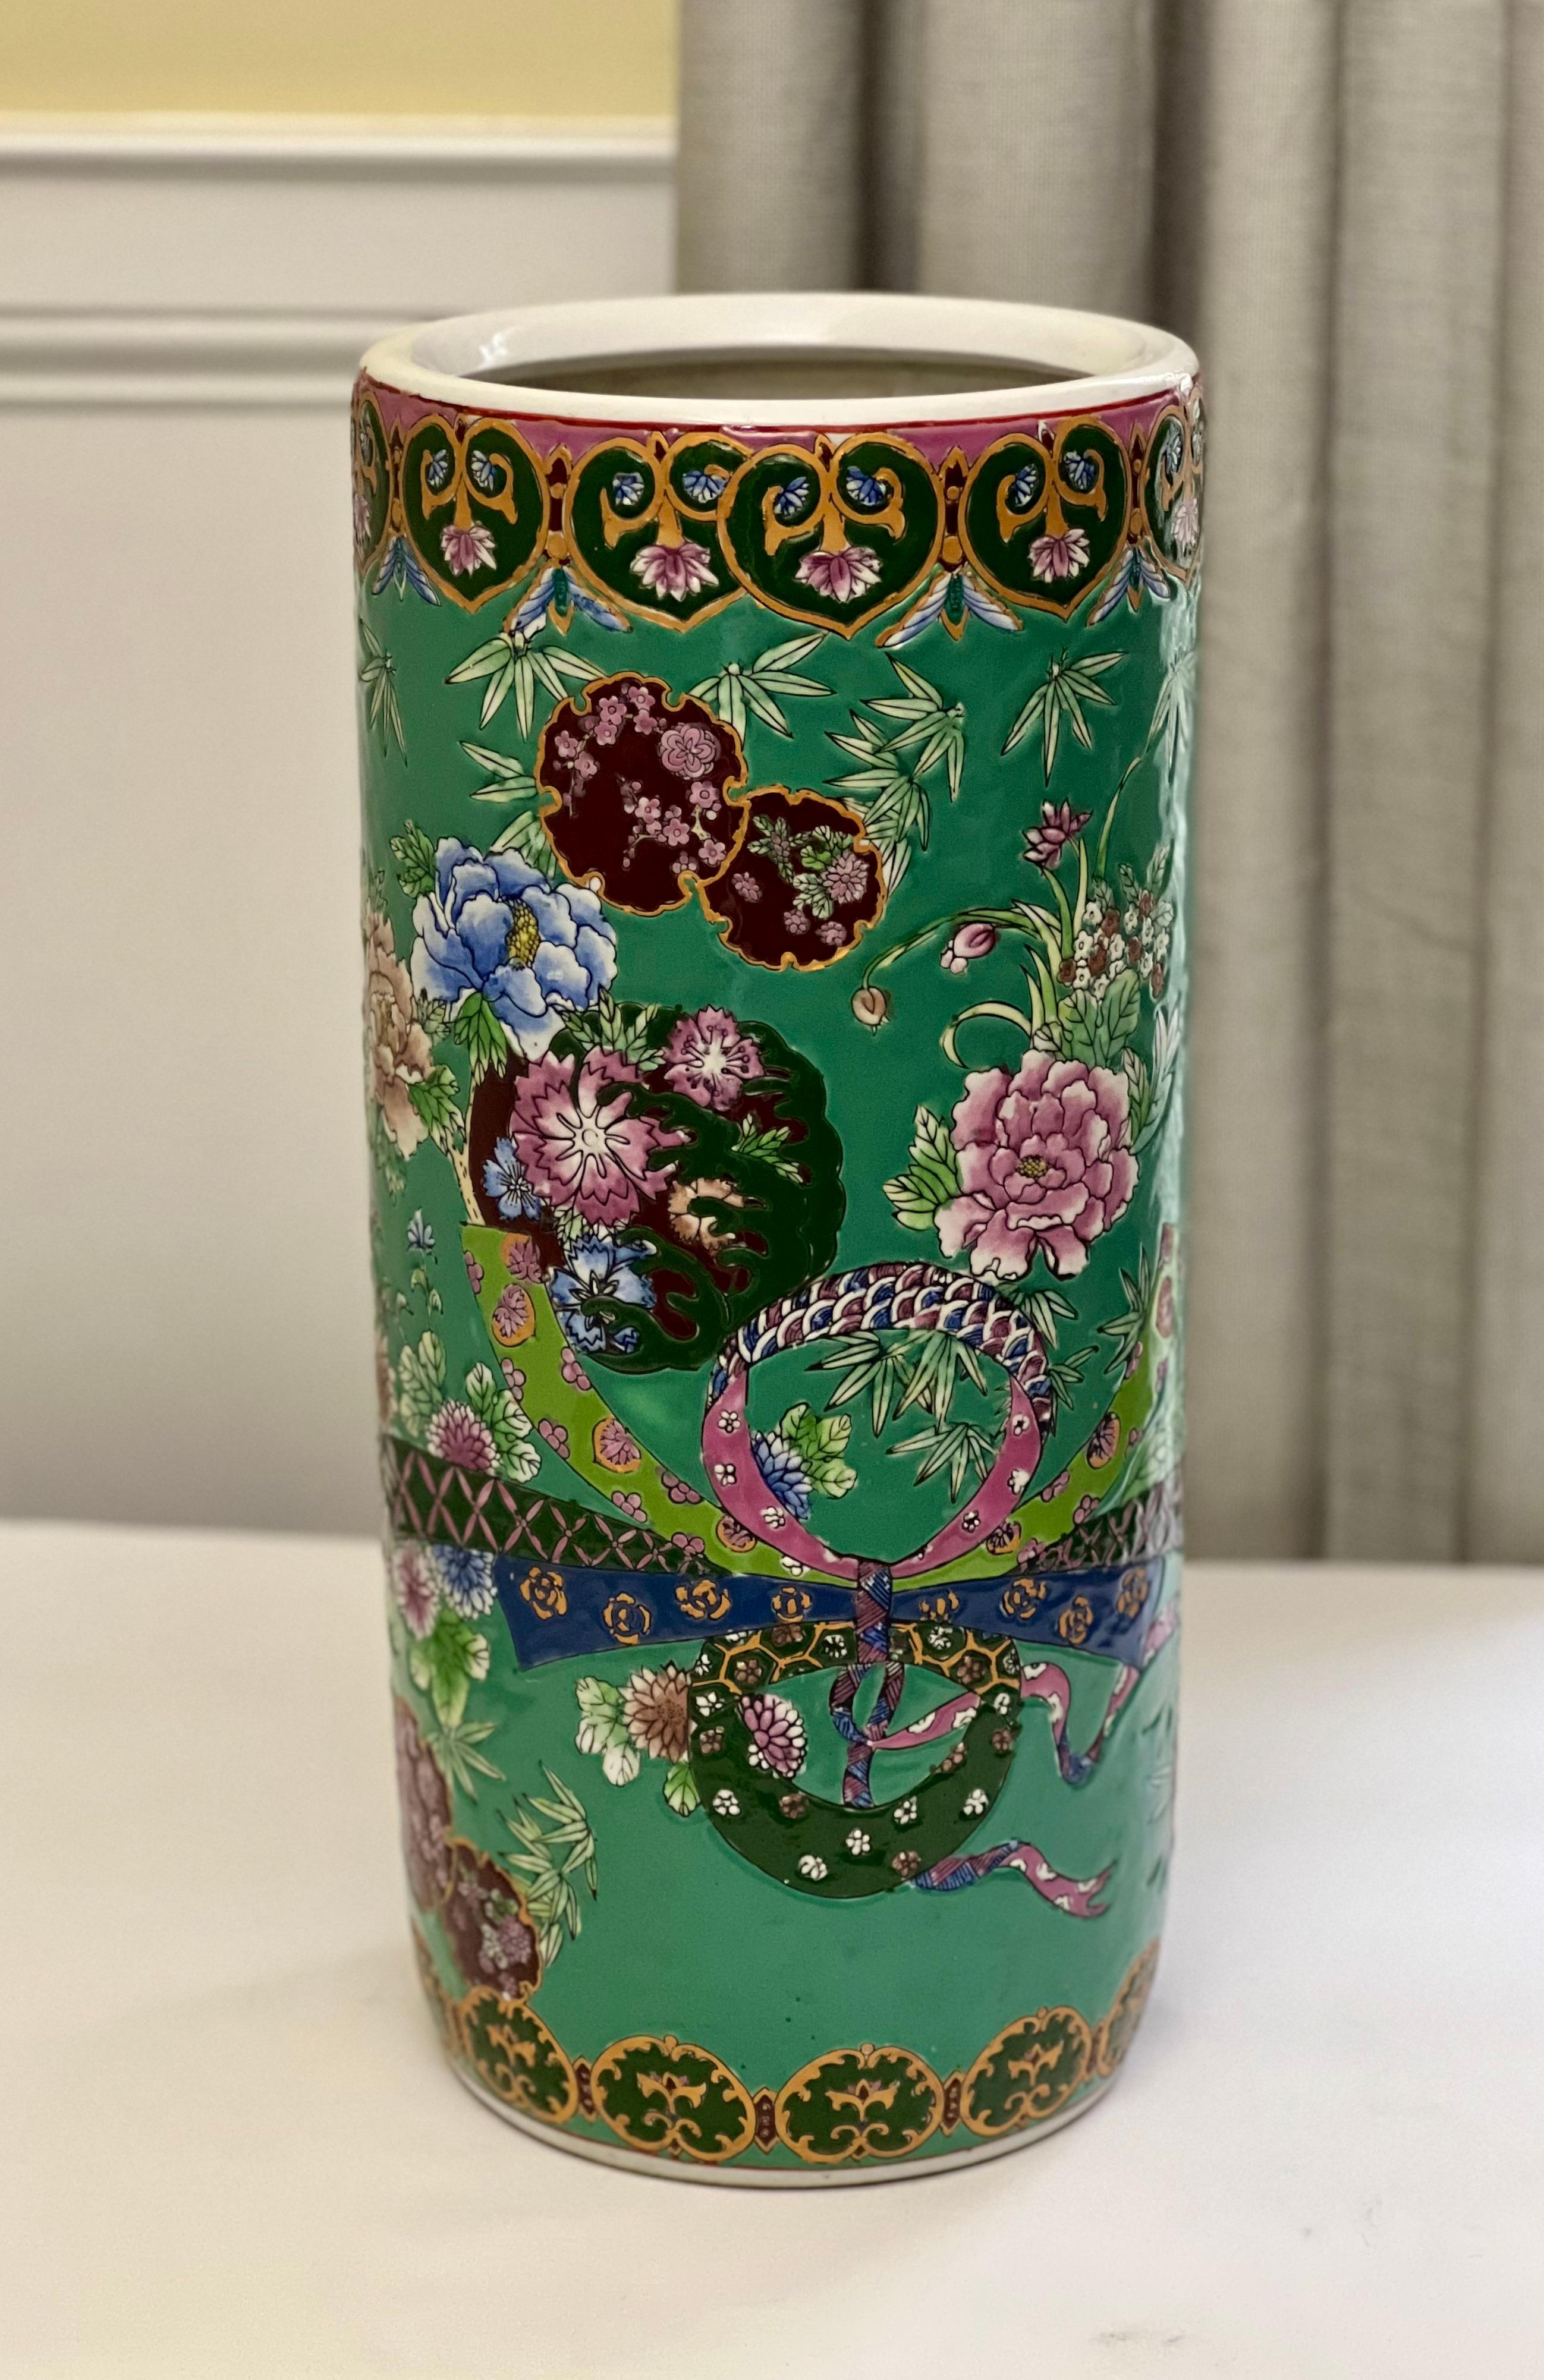 Chinese Famille Verte porcelain cylinder vase or umbrella holder, c. 1960s.

This cheerful vase or cane/umbrella holder has great vibrant colors with flowers and ribbon swag detail. Marked on the bottom with an honorary/apocryphal dynasty stamp.  It